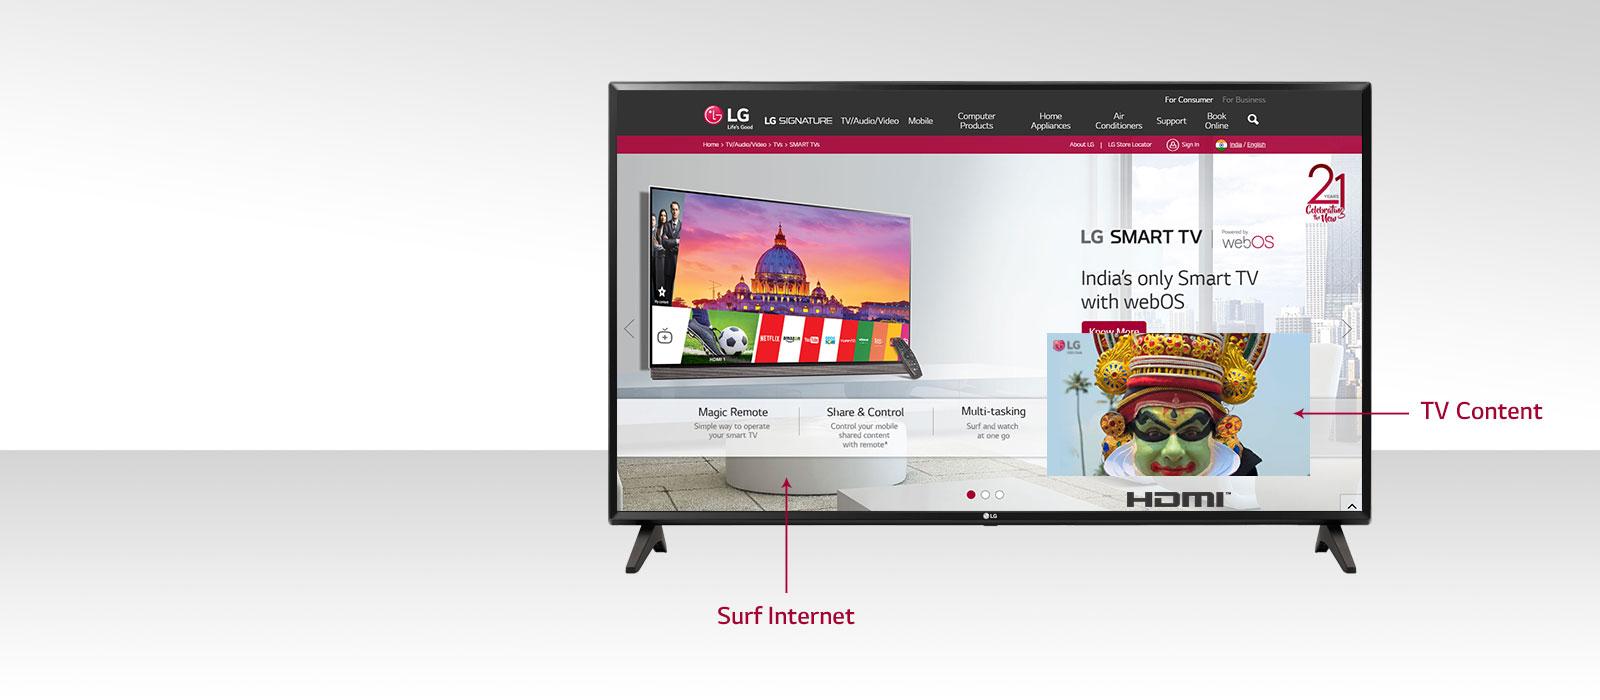 LG launches new Smart TV series with ThinQ AI in India